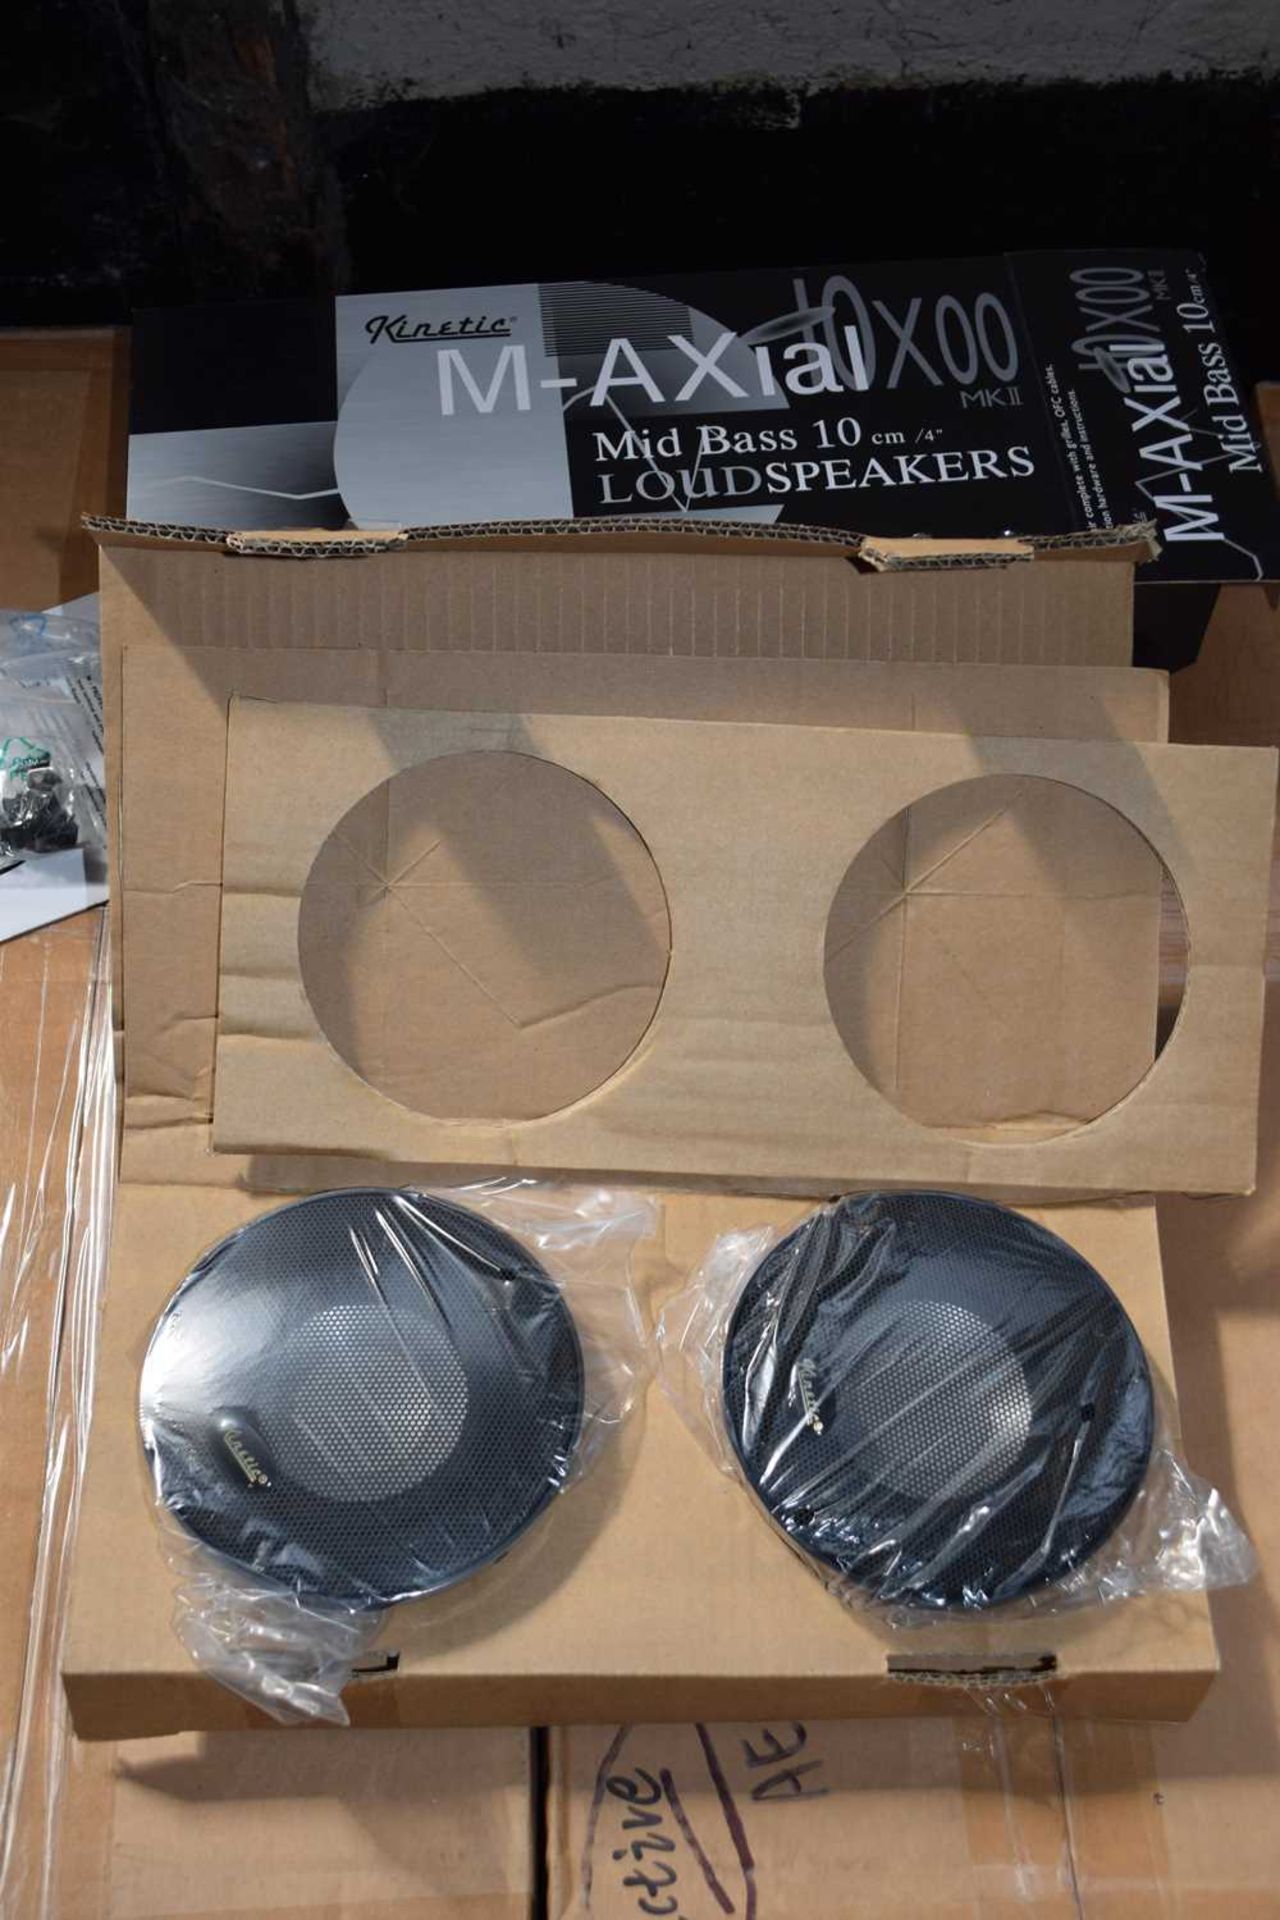 Box of 6 pairs of Kinetic M/AXIAL Mid bass 10cm loud speakers 10X00MK2 - Image 3 of 7